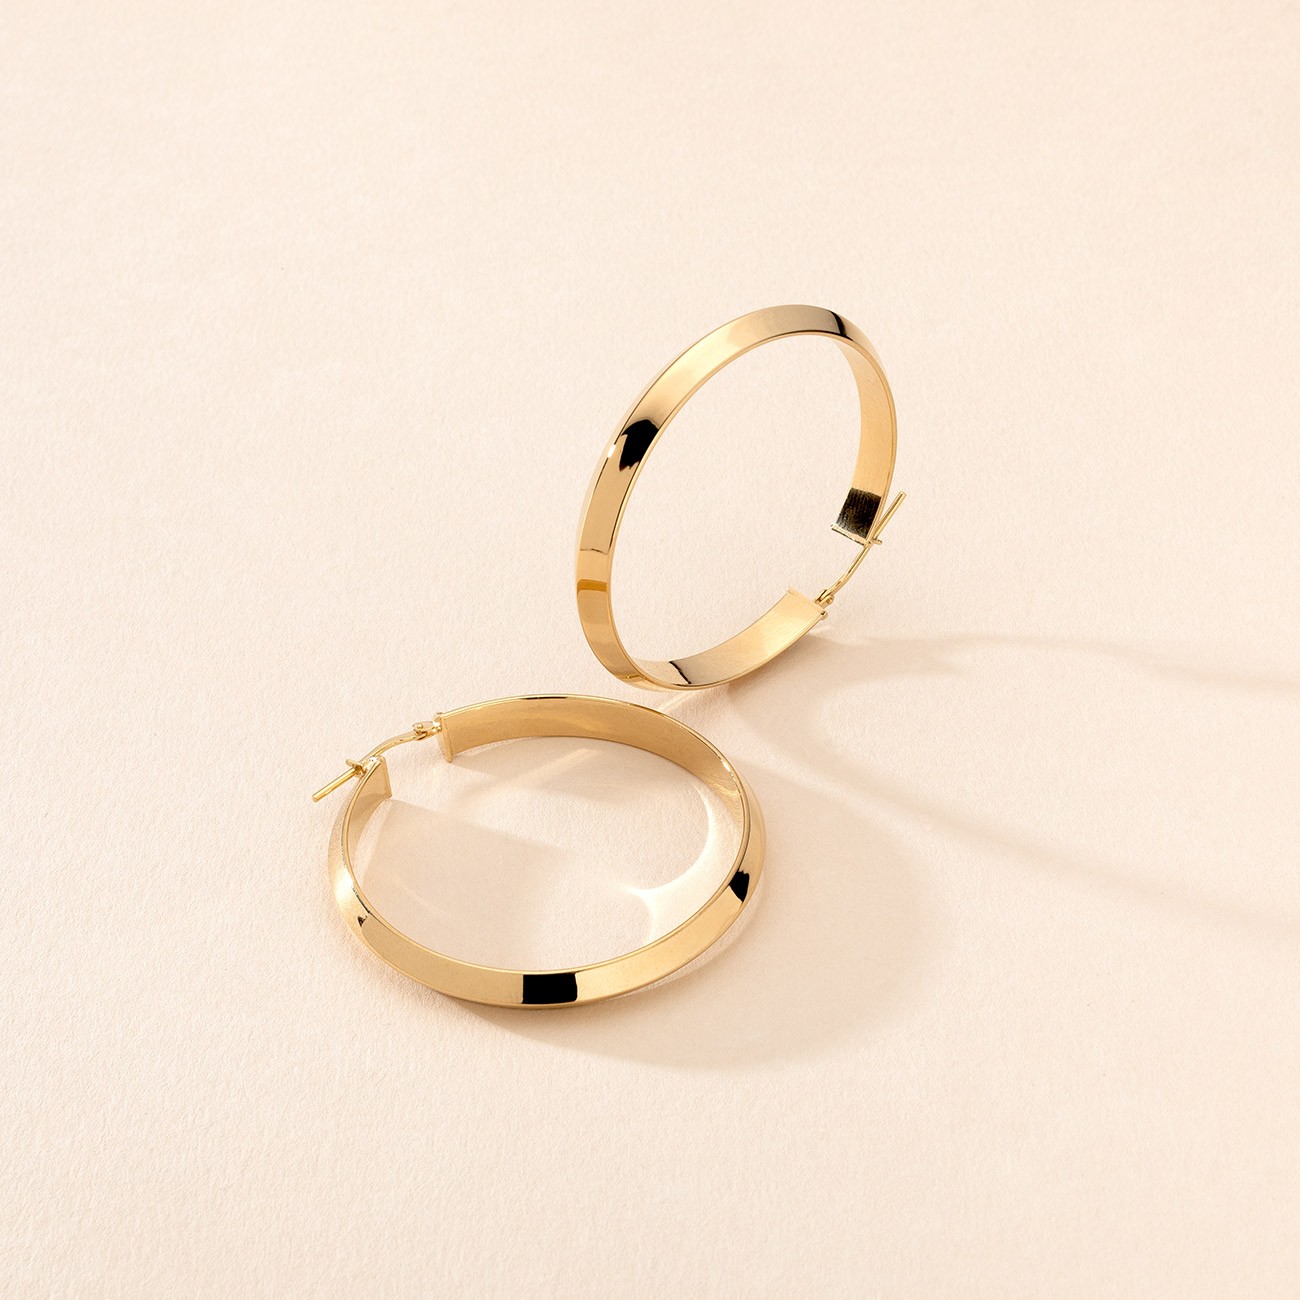 Round hoop earrings 2,5 cm with clasp, silver 925, XENIA x GIORRE